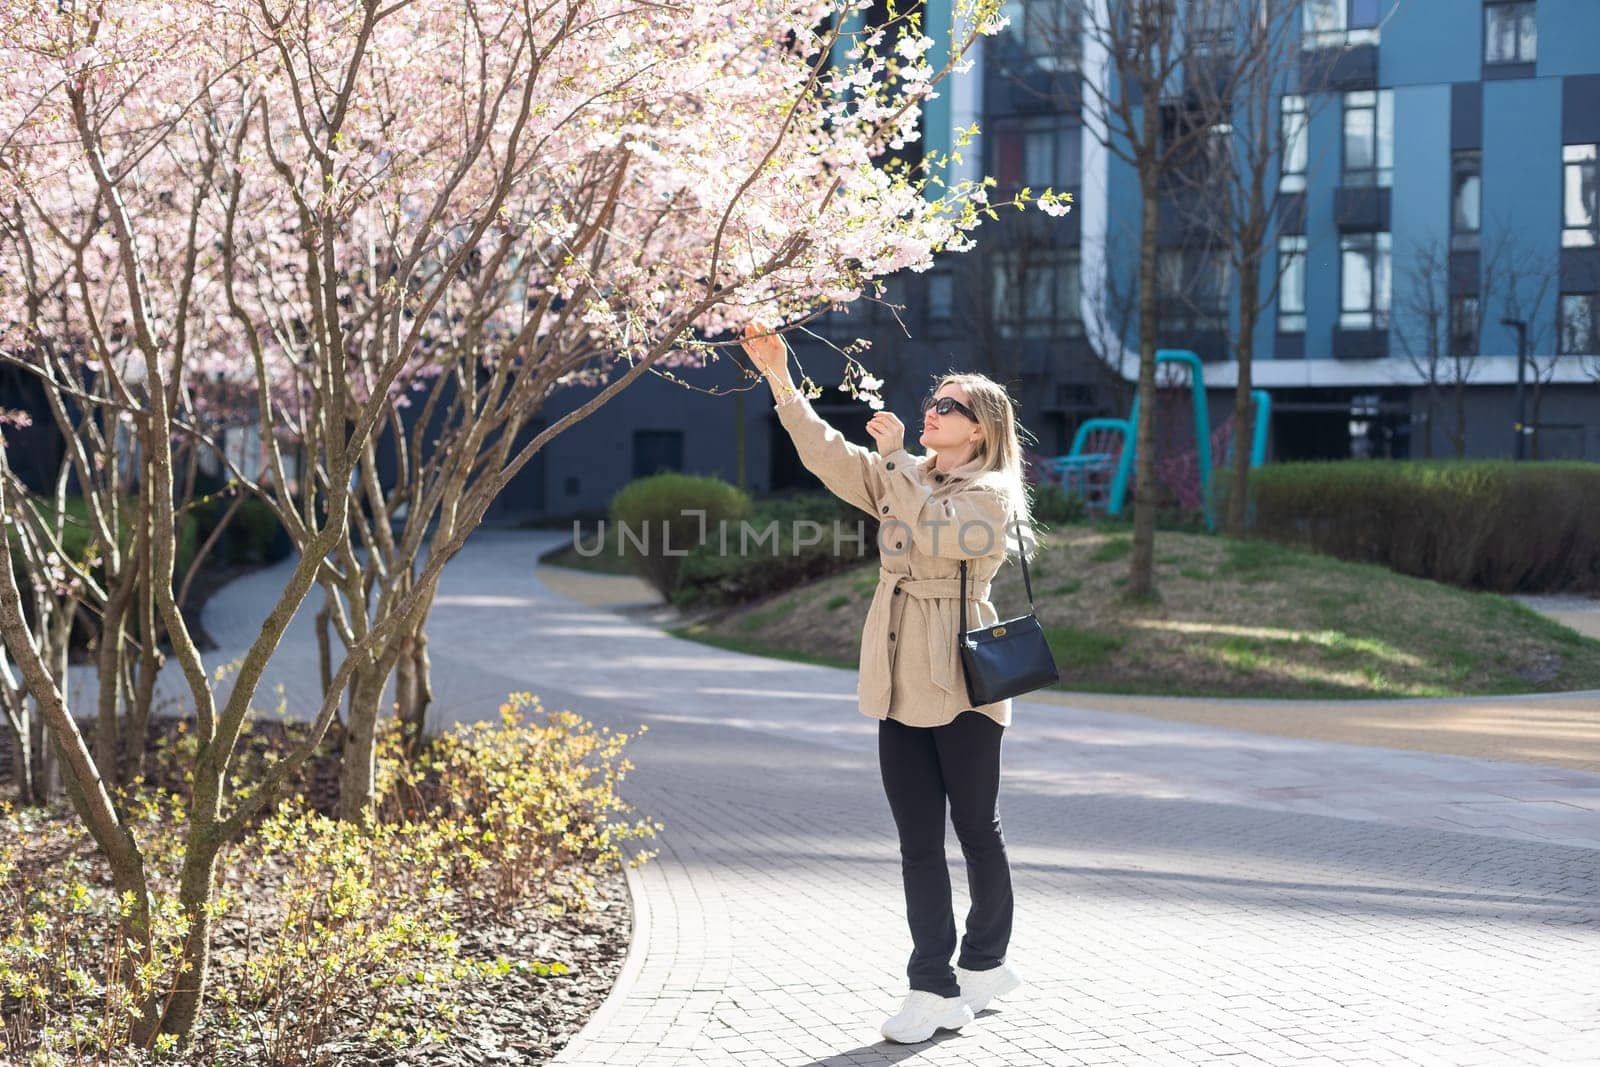 Sakura branches with flowers on a tree on the city streets. Happy woman girl in a gray palette walks along an alley with blooming sakura. Gorgeous fancy girl outdoors. Sakura tree blooming. High quality photo